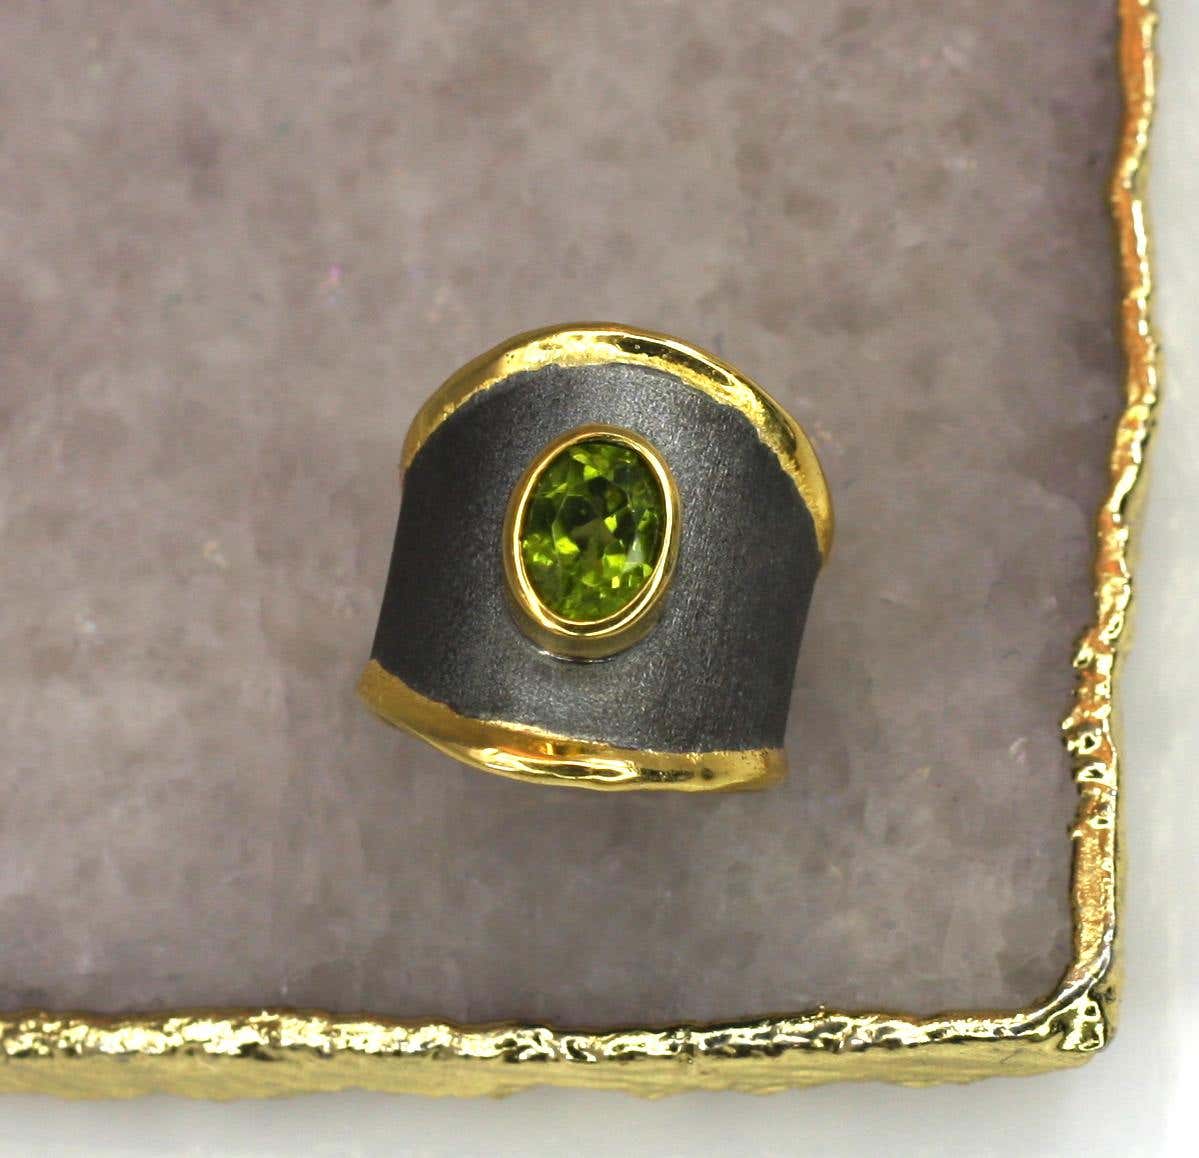 Eclyps Fine Silver and Gold Two-Tone Peridot Thick Band Ruthenium Ring